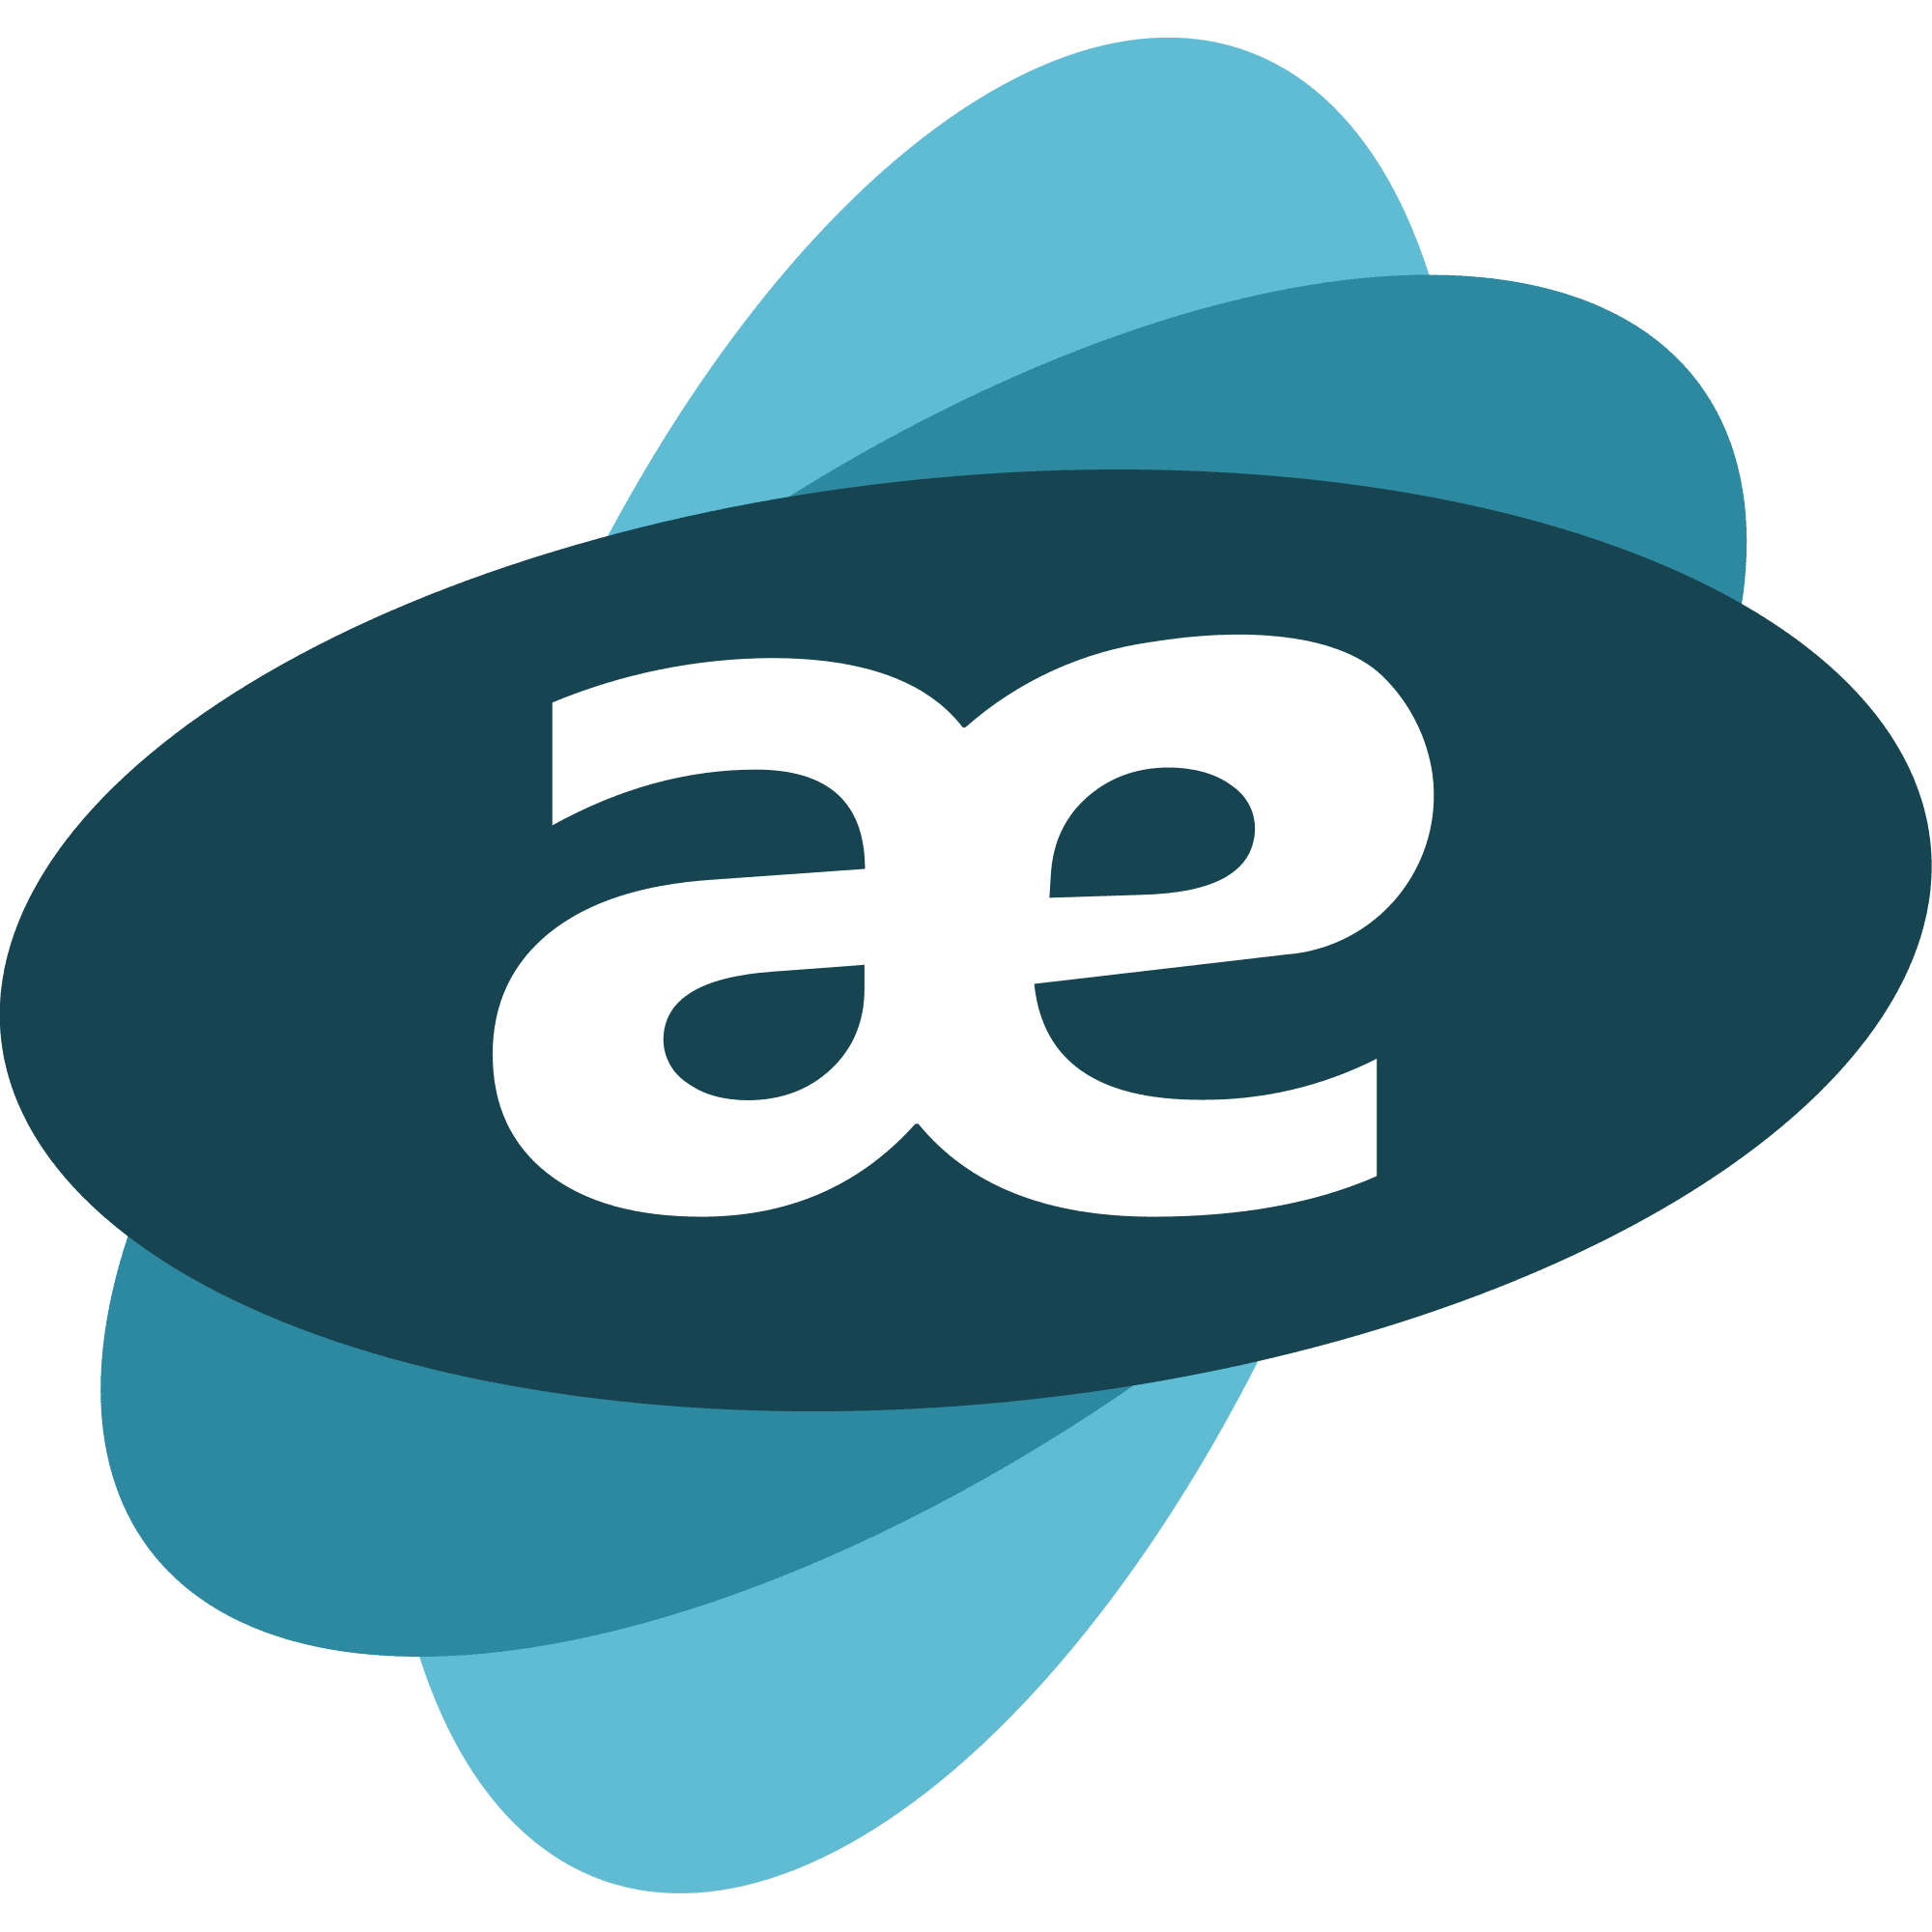 Aeon logo in png format